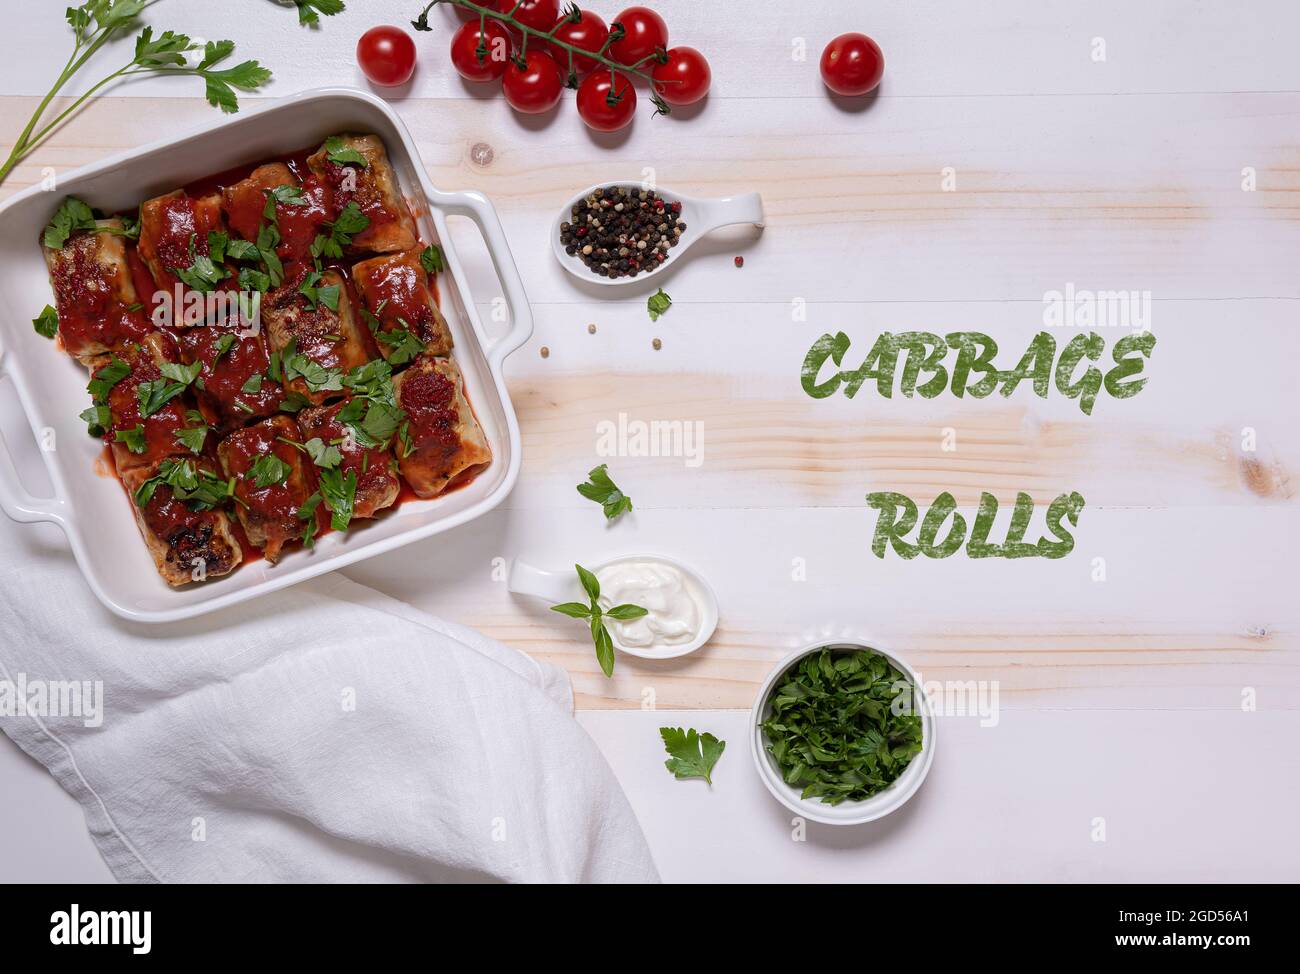 Square baking pan with cabbage rolls in tomato sauce, cherry tomatoes, chopped fresh parsley, sour cream, linen napkin. Flat lay with. White and beige Stock Photo